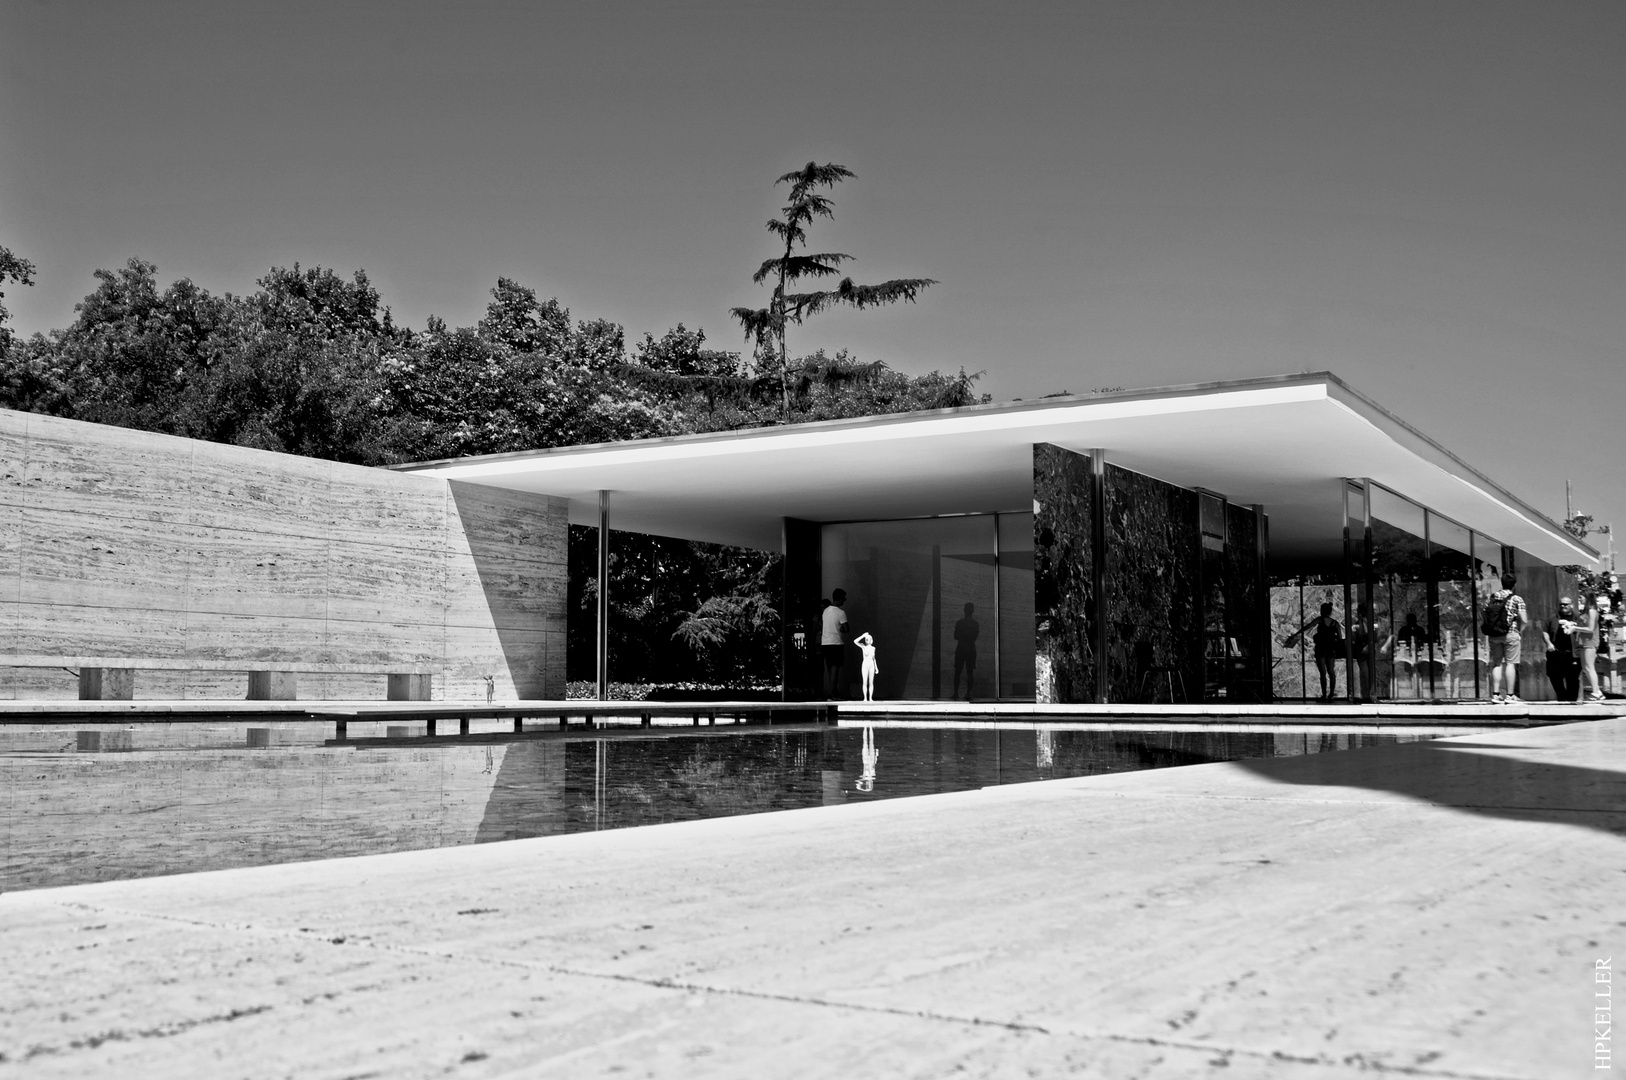 Some days ago at the Barcelona-Pavillon, ...in the footsteps of Mies van der Rohe.